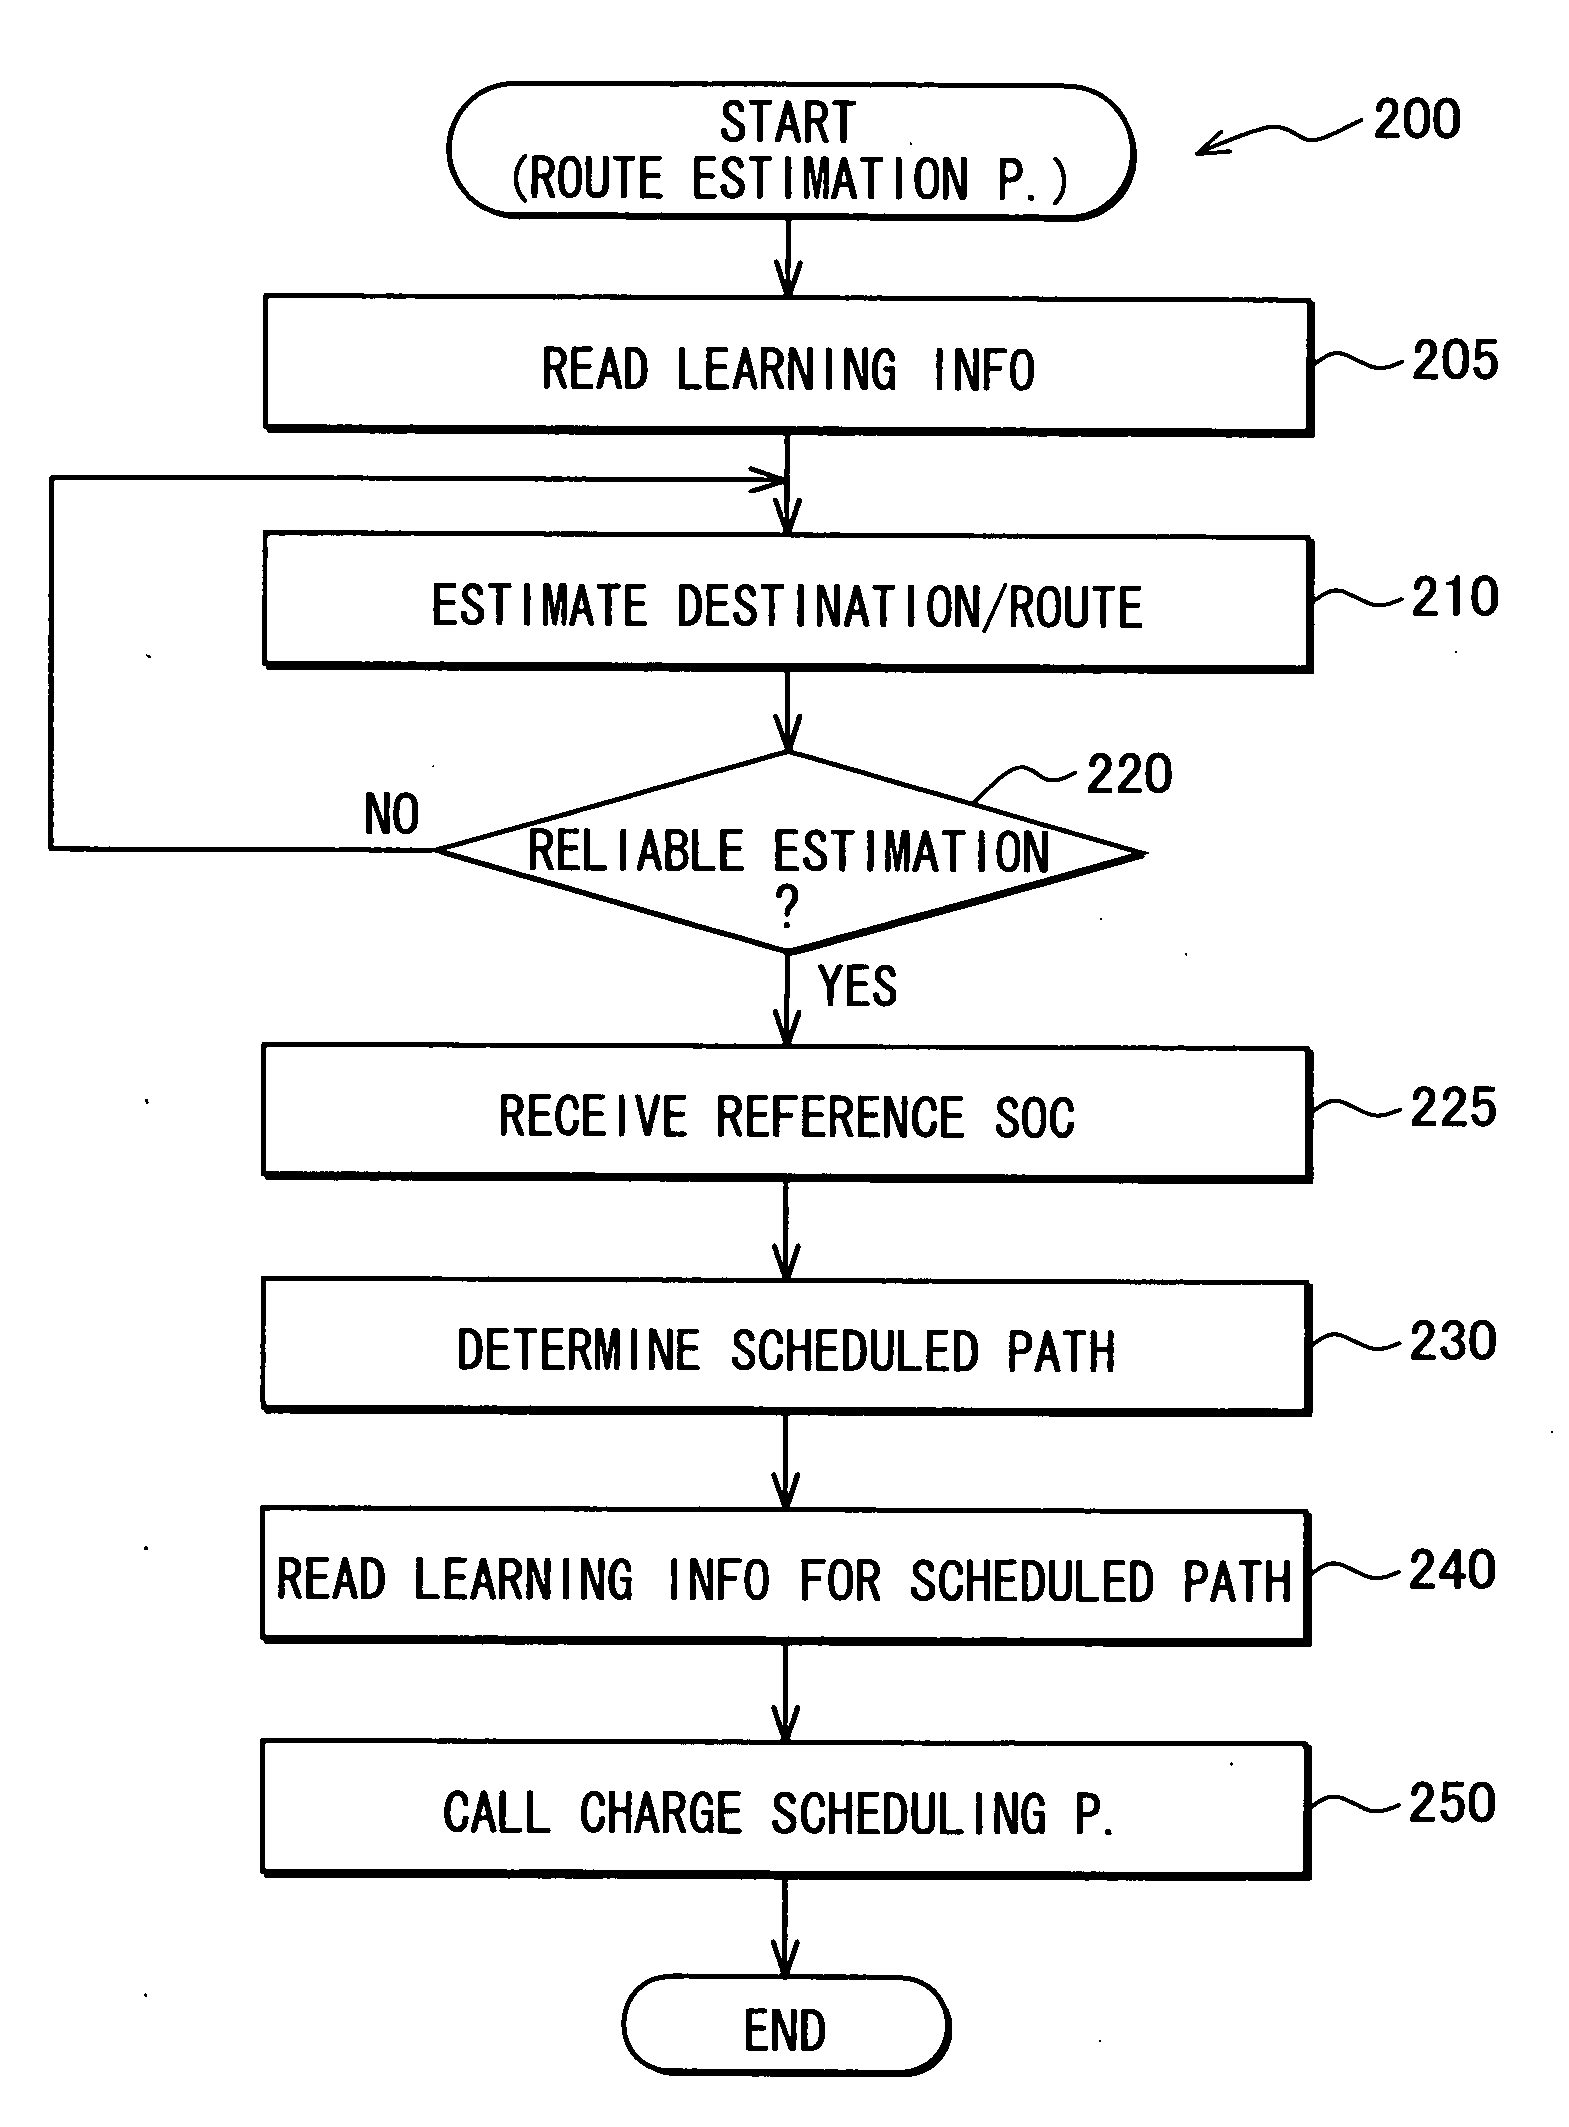 Charge-discharge management apparatus and computer readable medium comprising instructions for achieving the apparatus